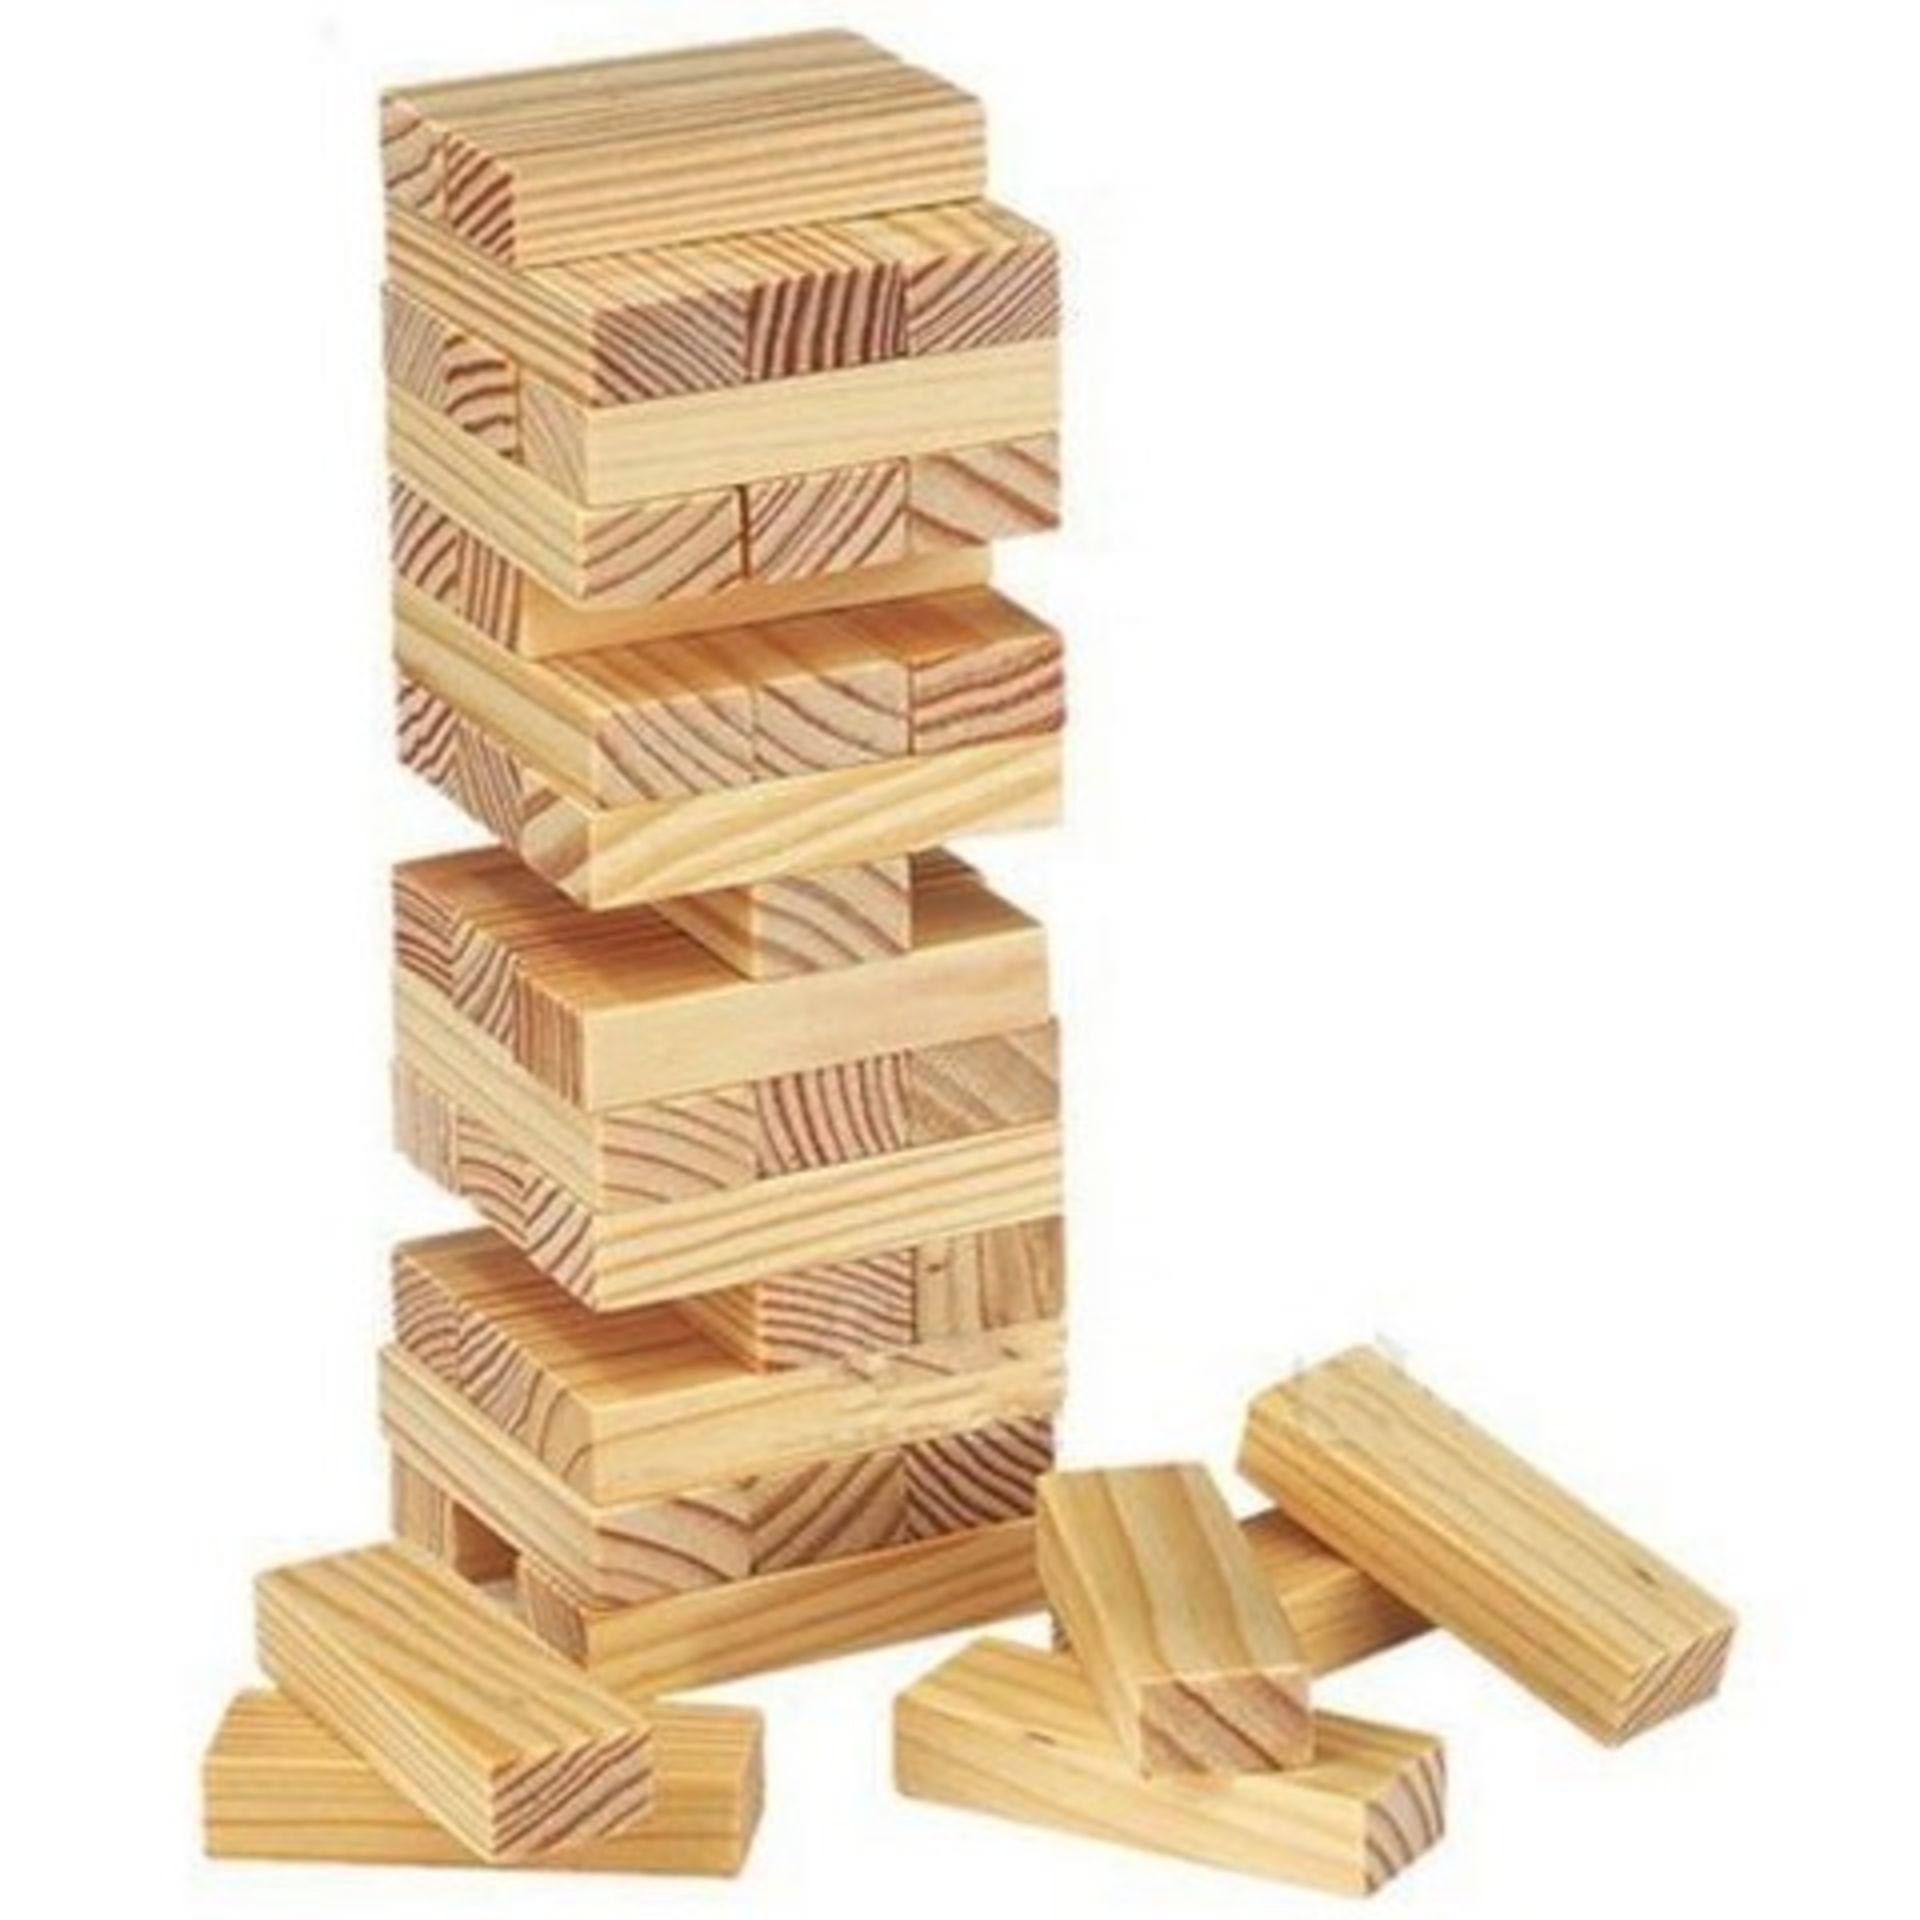 + VAT Brand New Quality Wooden Tower Block Game